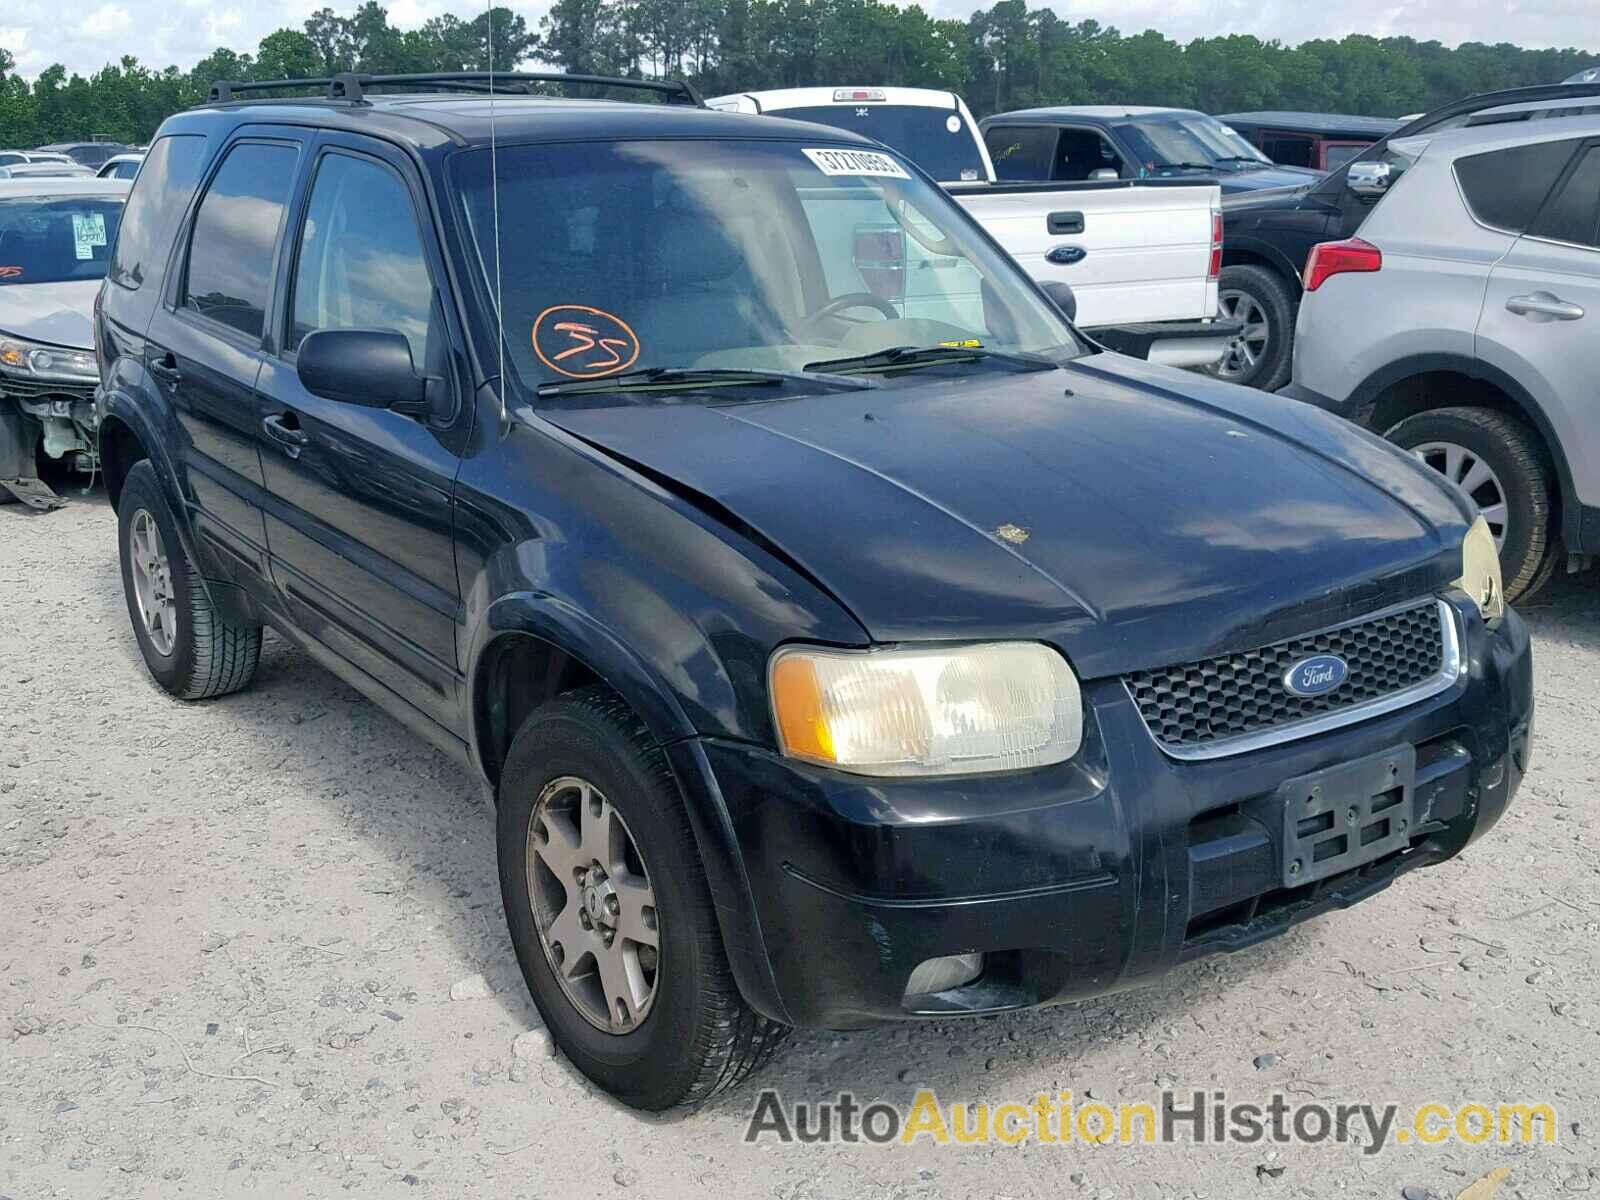 2003 FORD ESCAPE LIMITED, 1FMCU04133KD48772